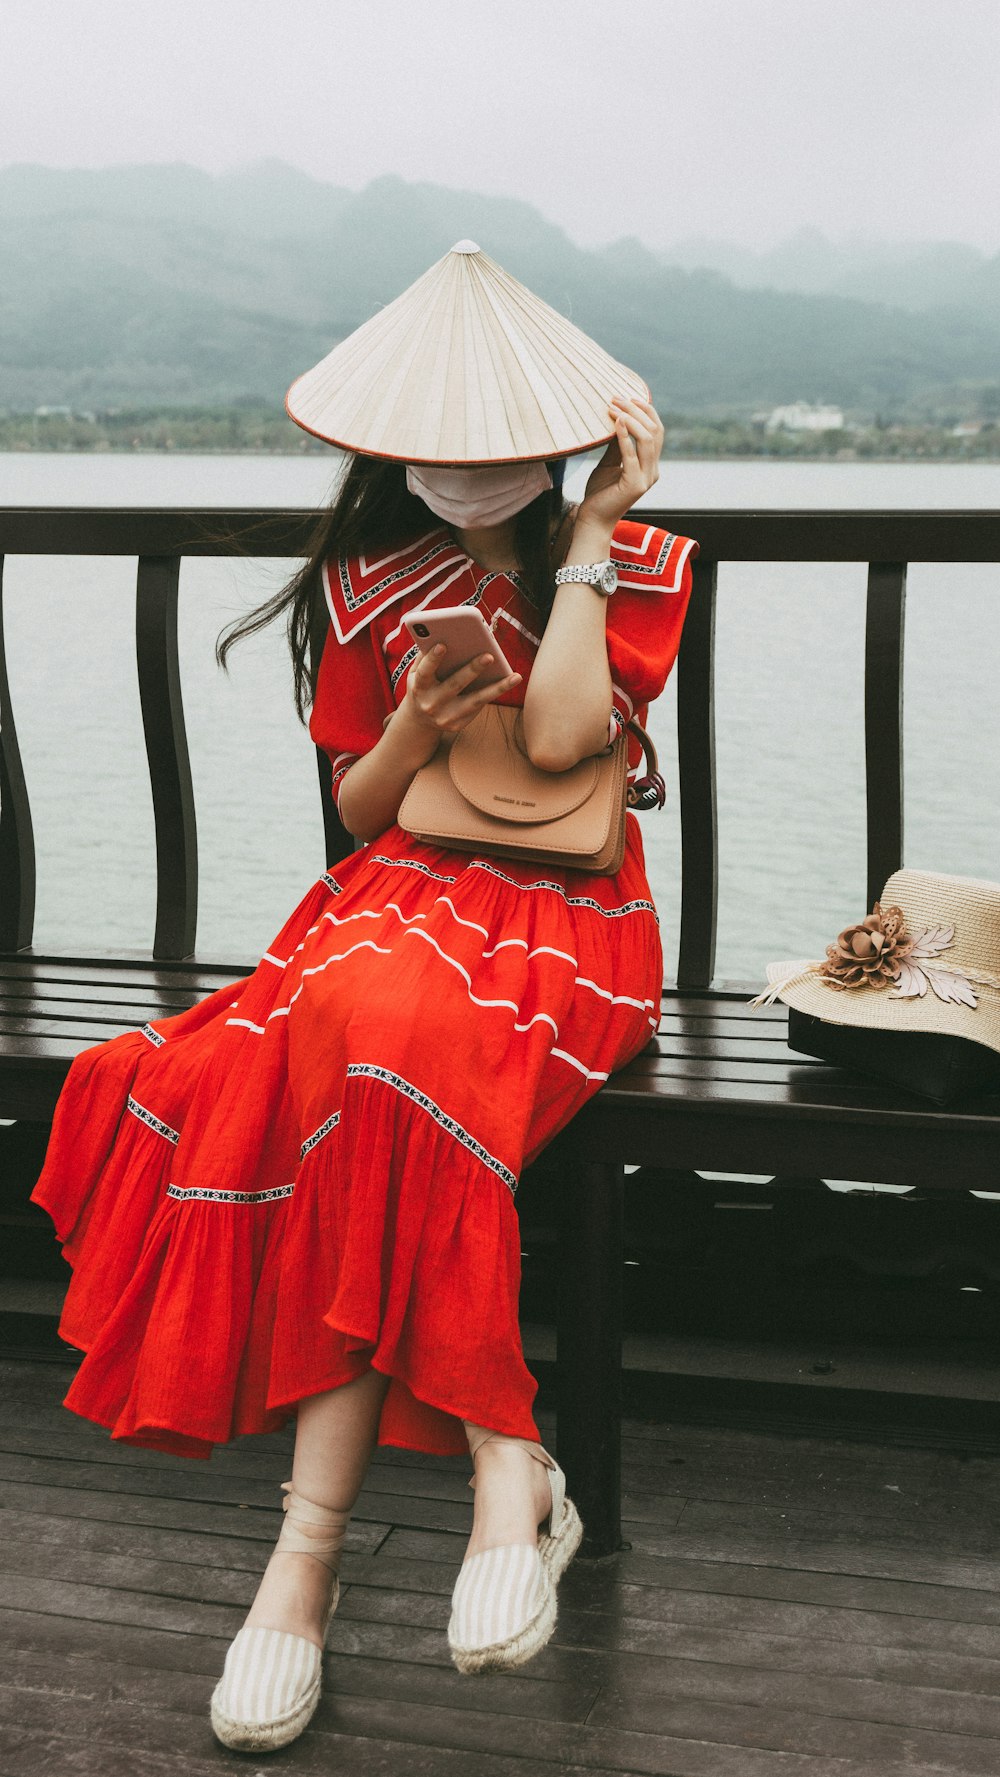 woman in red dress wearing white sun hat sitting on brown wooden bench during daytime